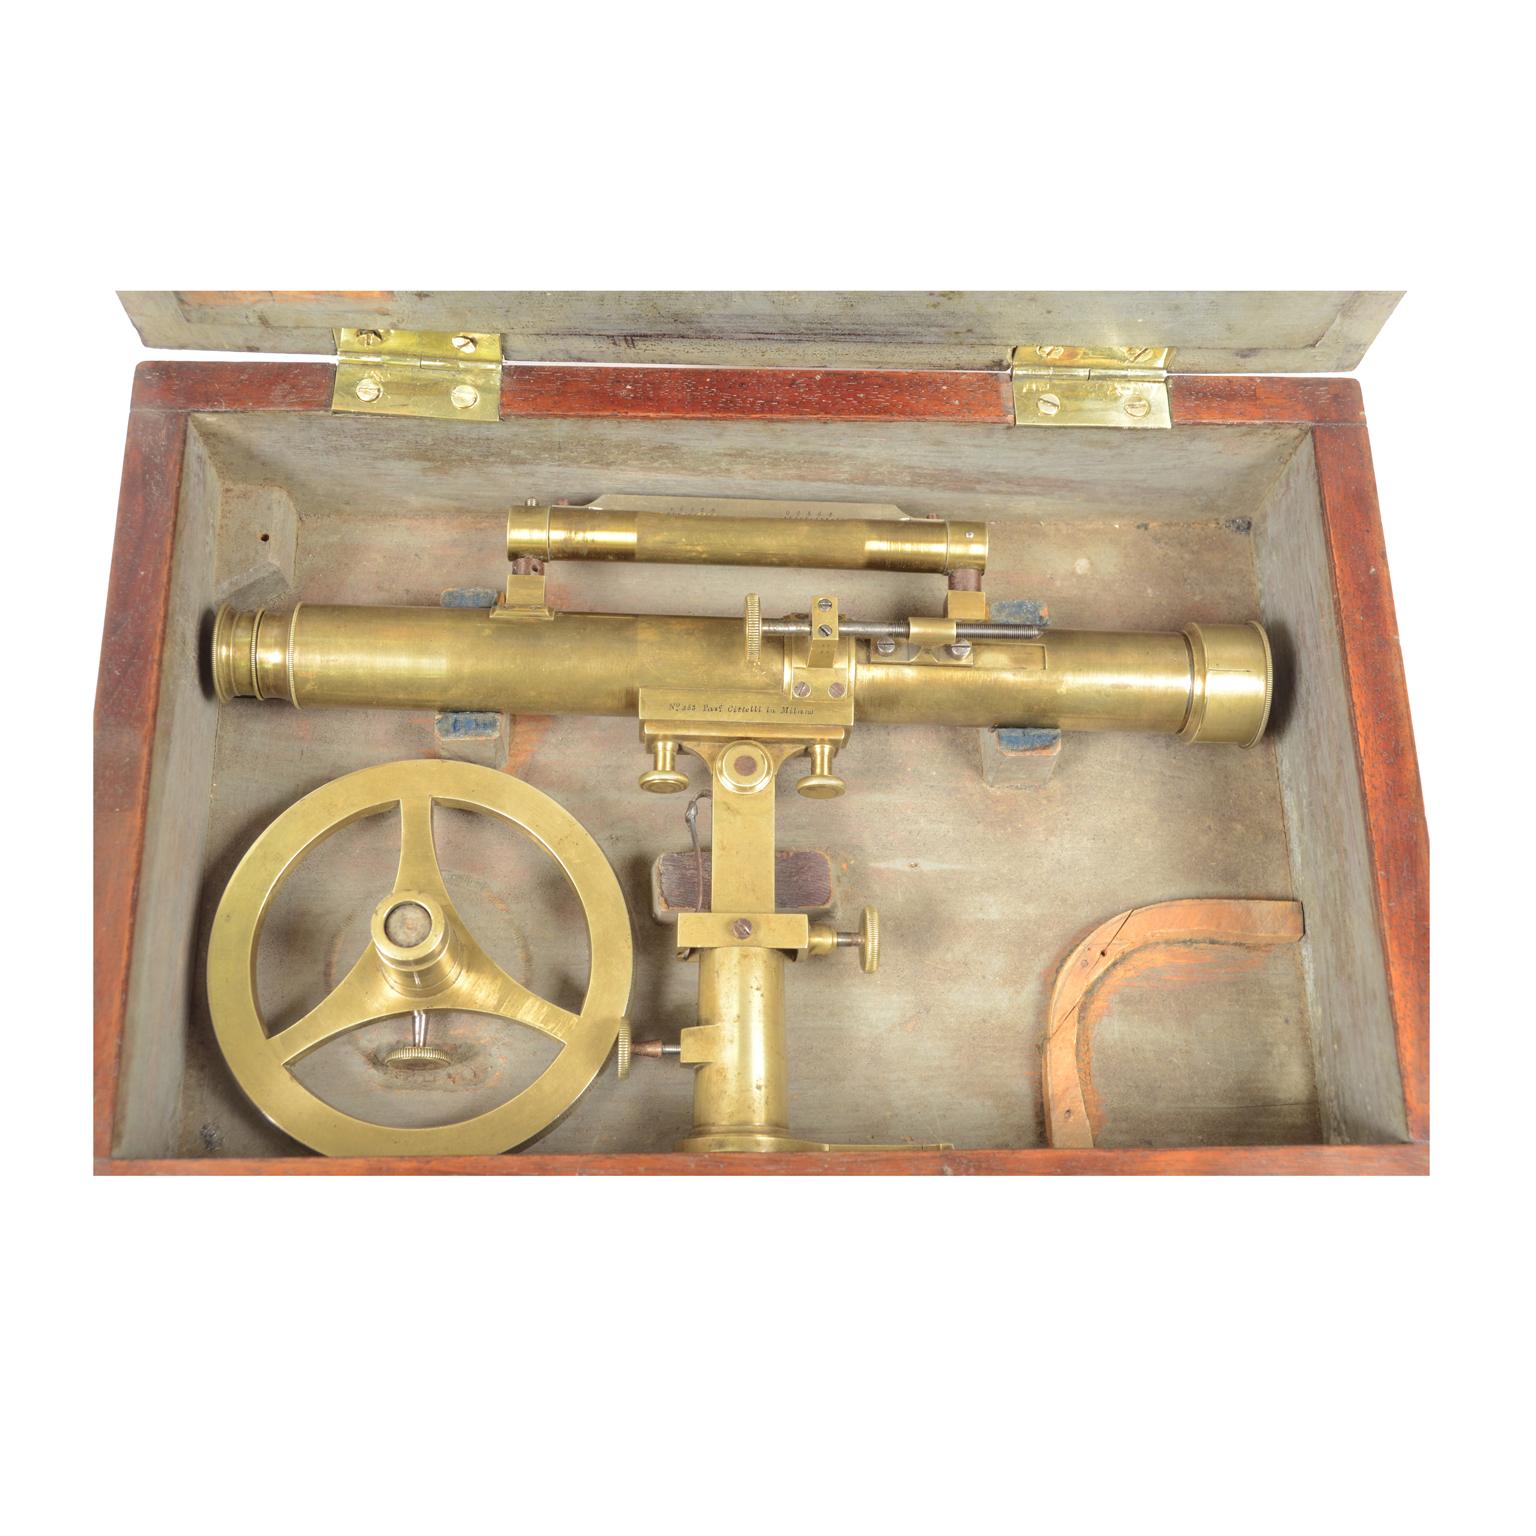 Topographic level with telescope or simple theodolite of brass with original patina, signed Pasquale Cittelli Milan n. 353, first decade of the 19th century, in good condition and complete with original walnut box, with brass hinges and closing